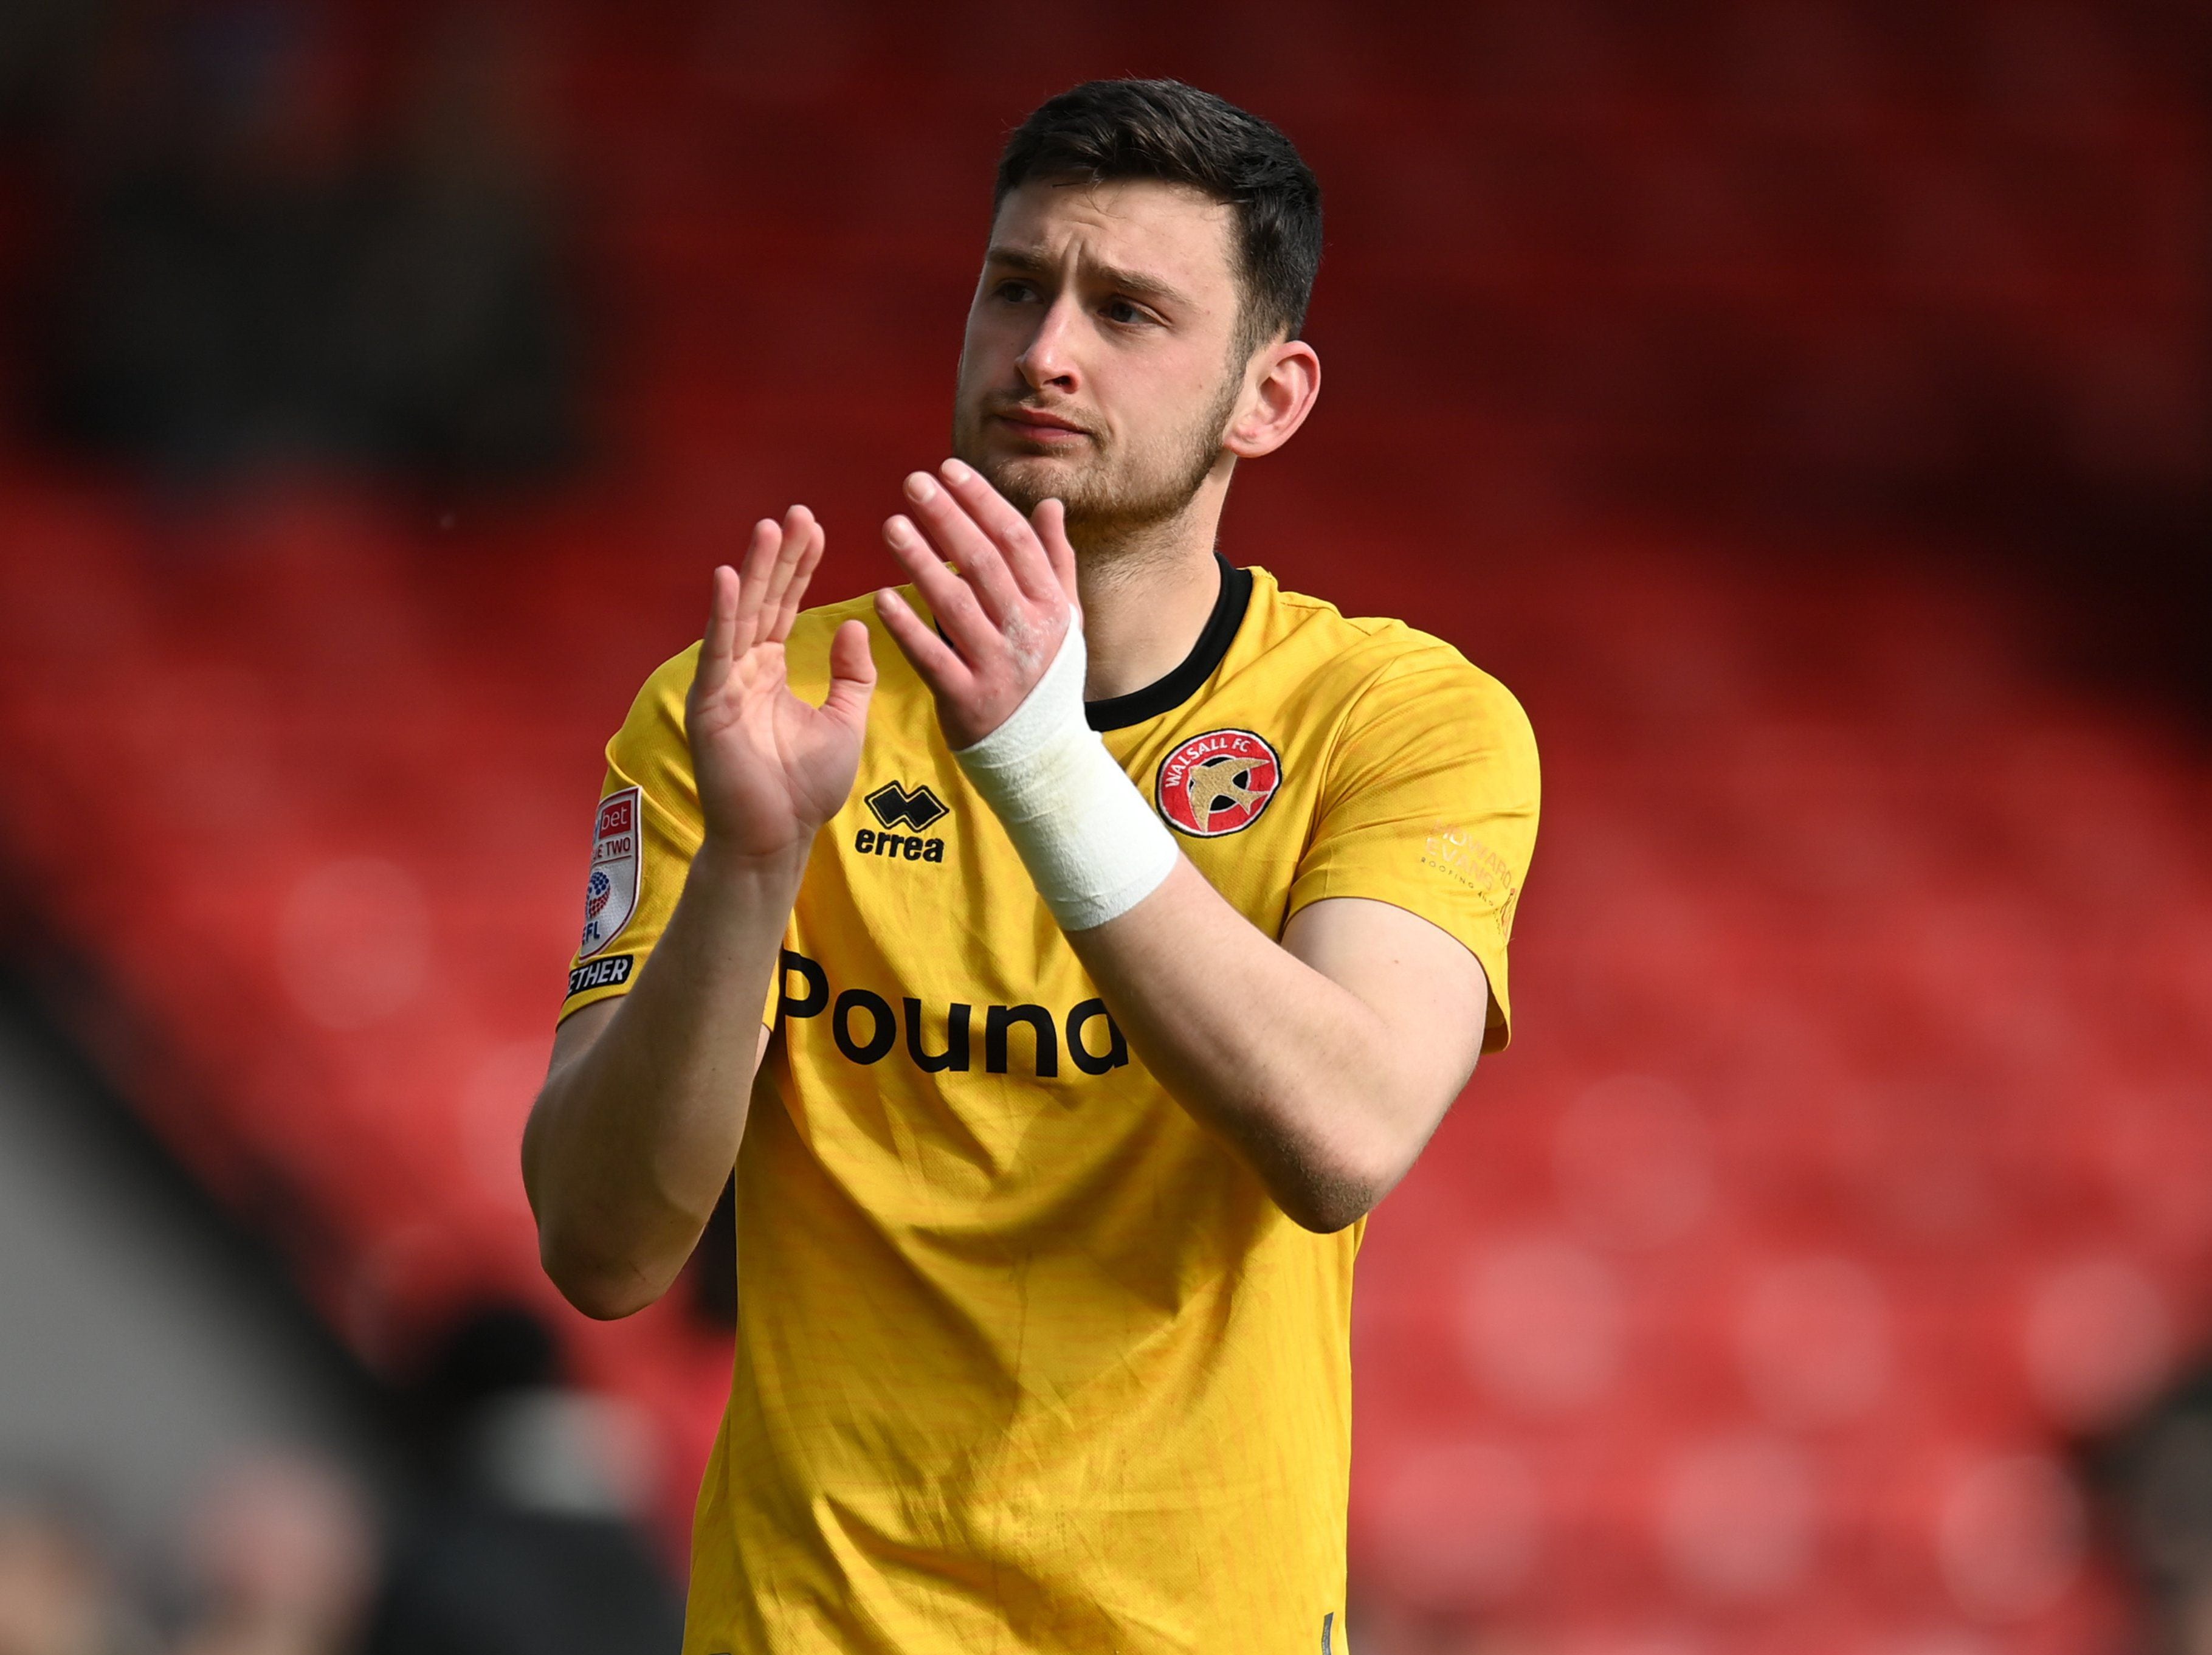 Departing goalkeeper to 'cherish' Walsall memories after Barnsley switch